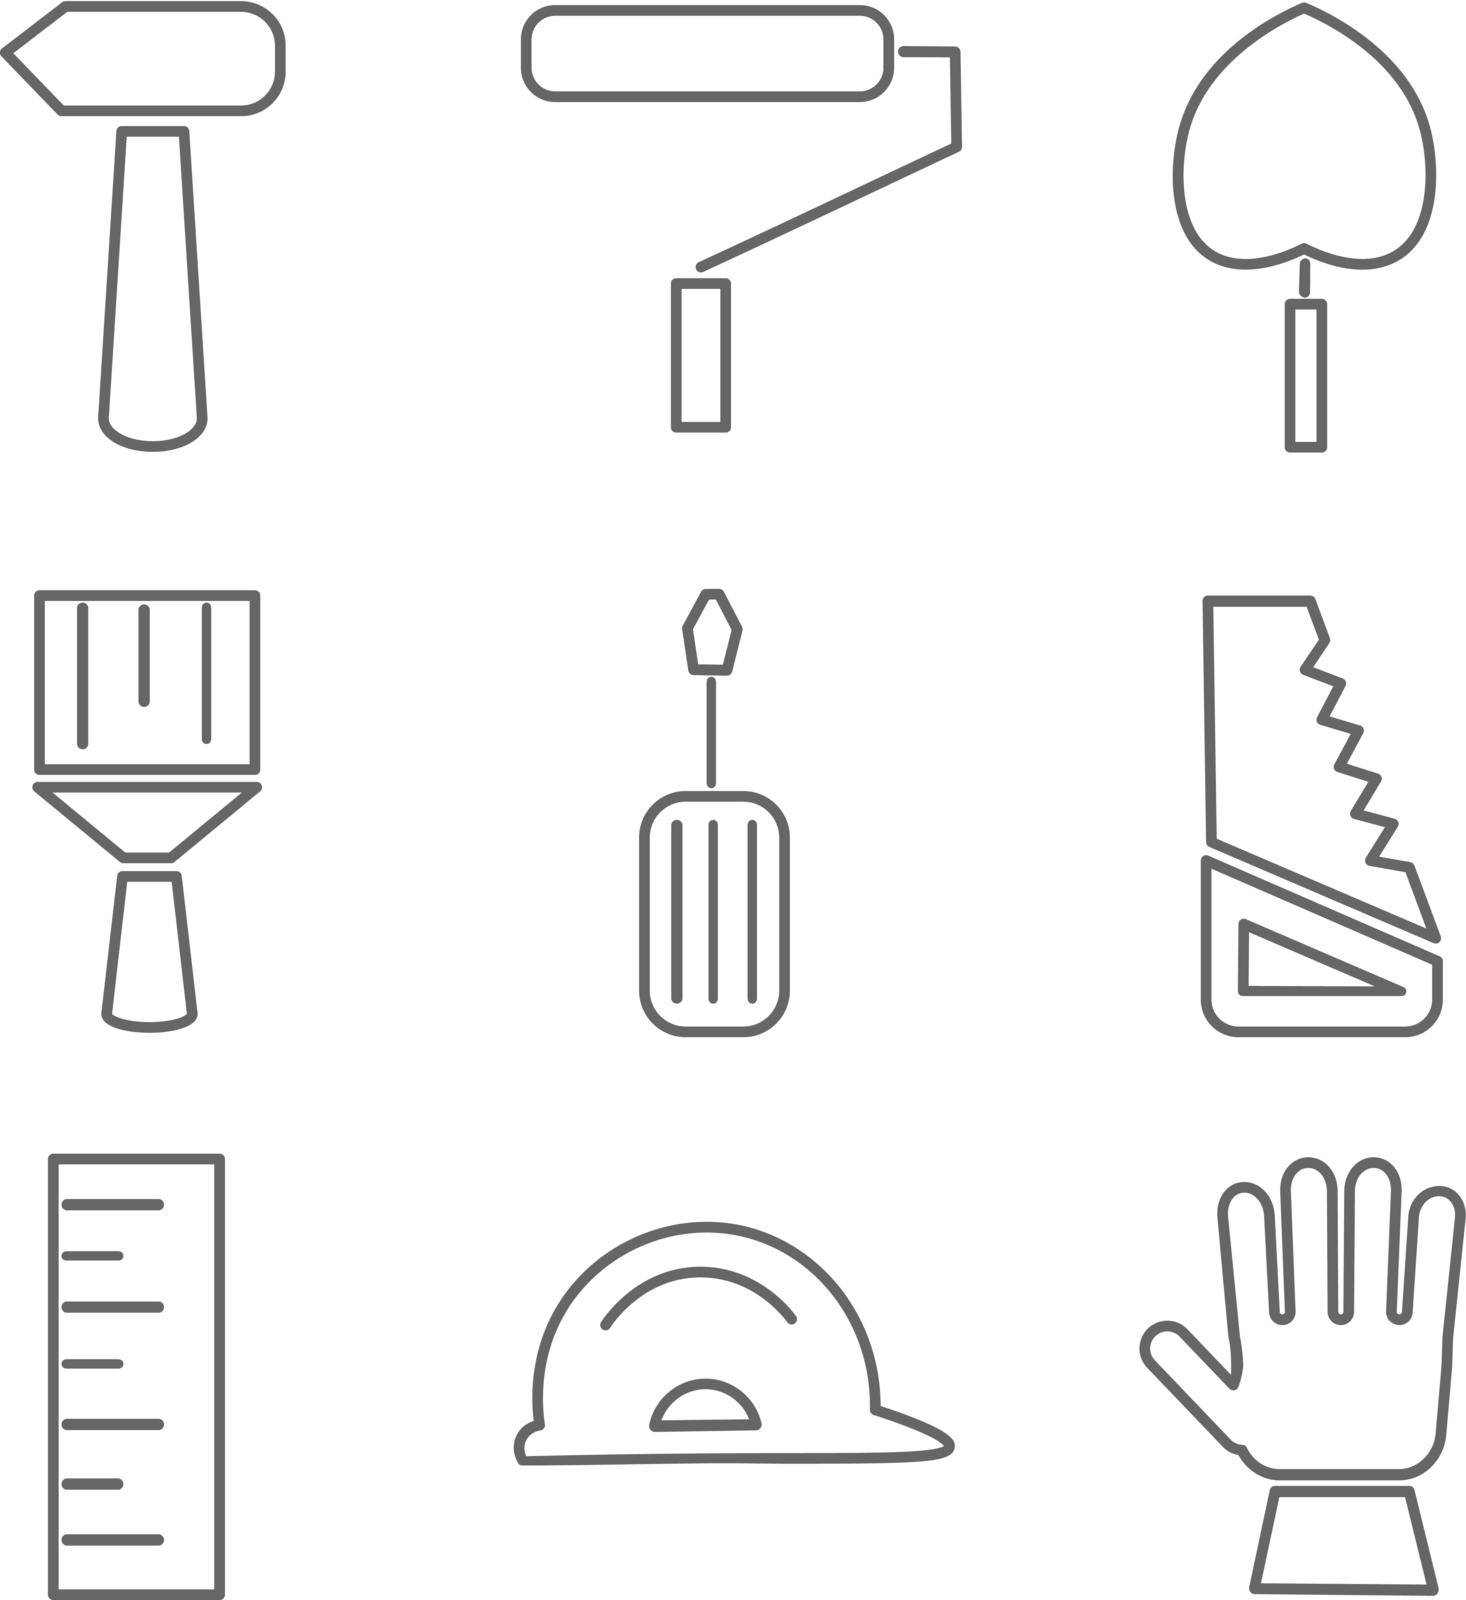 House remodel. Set of house renovation icons.